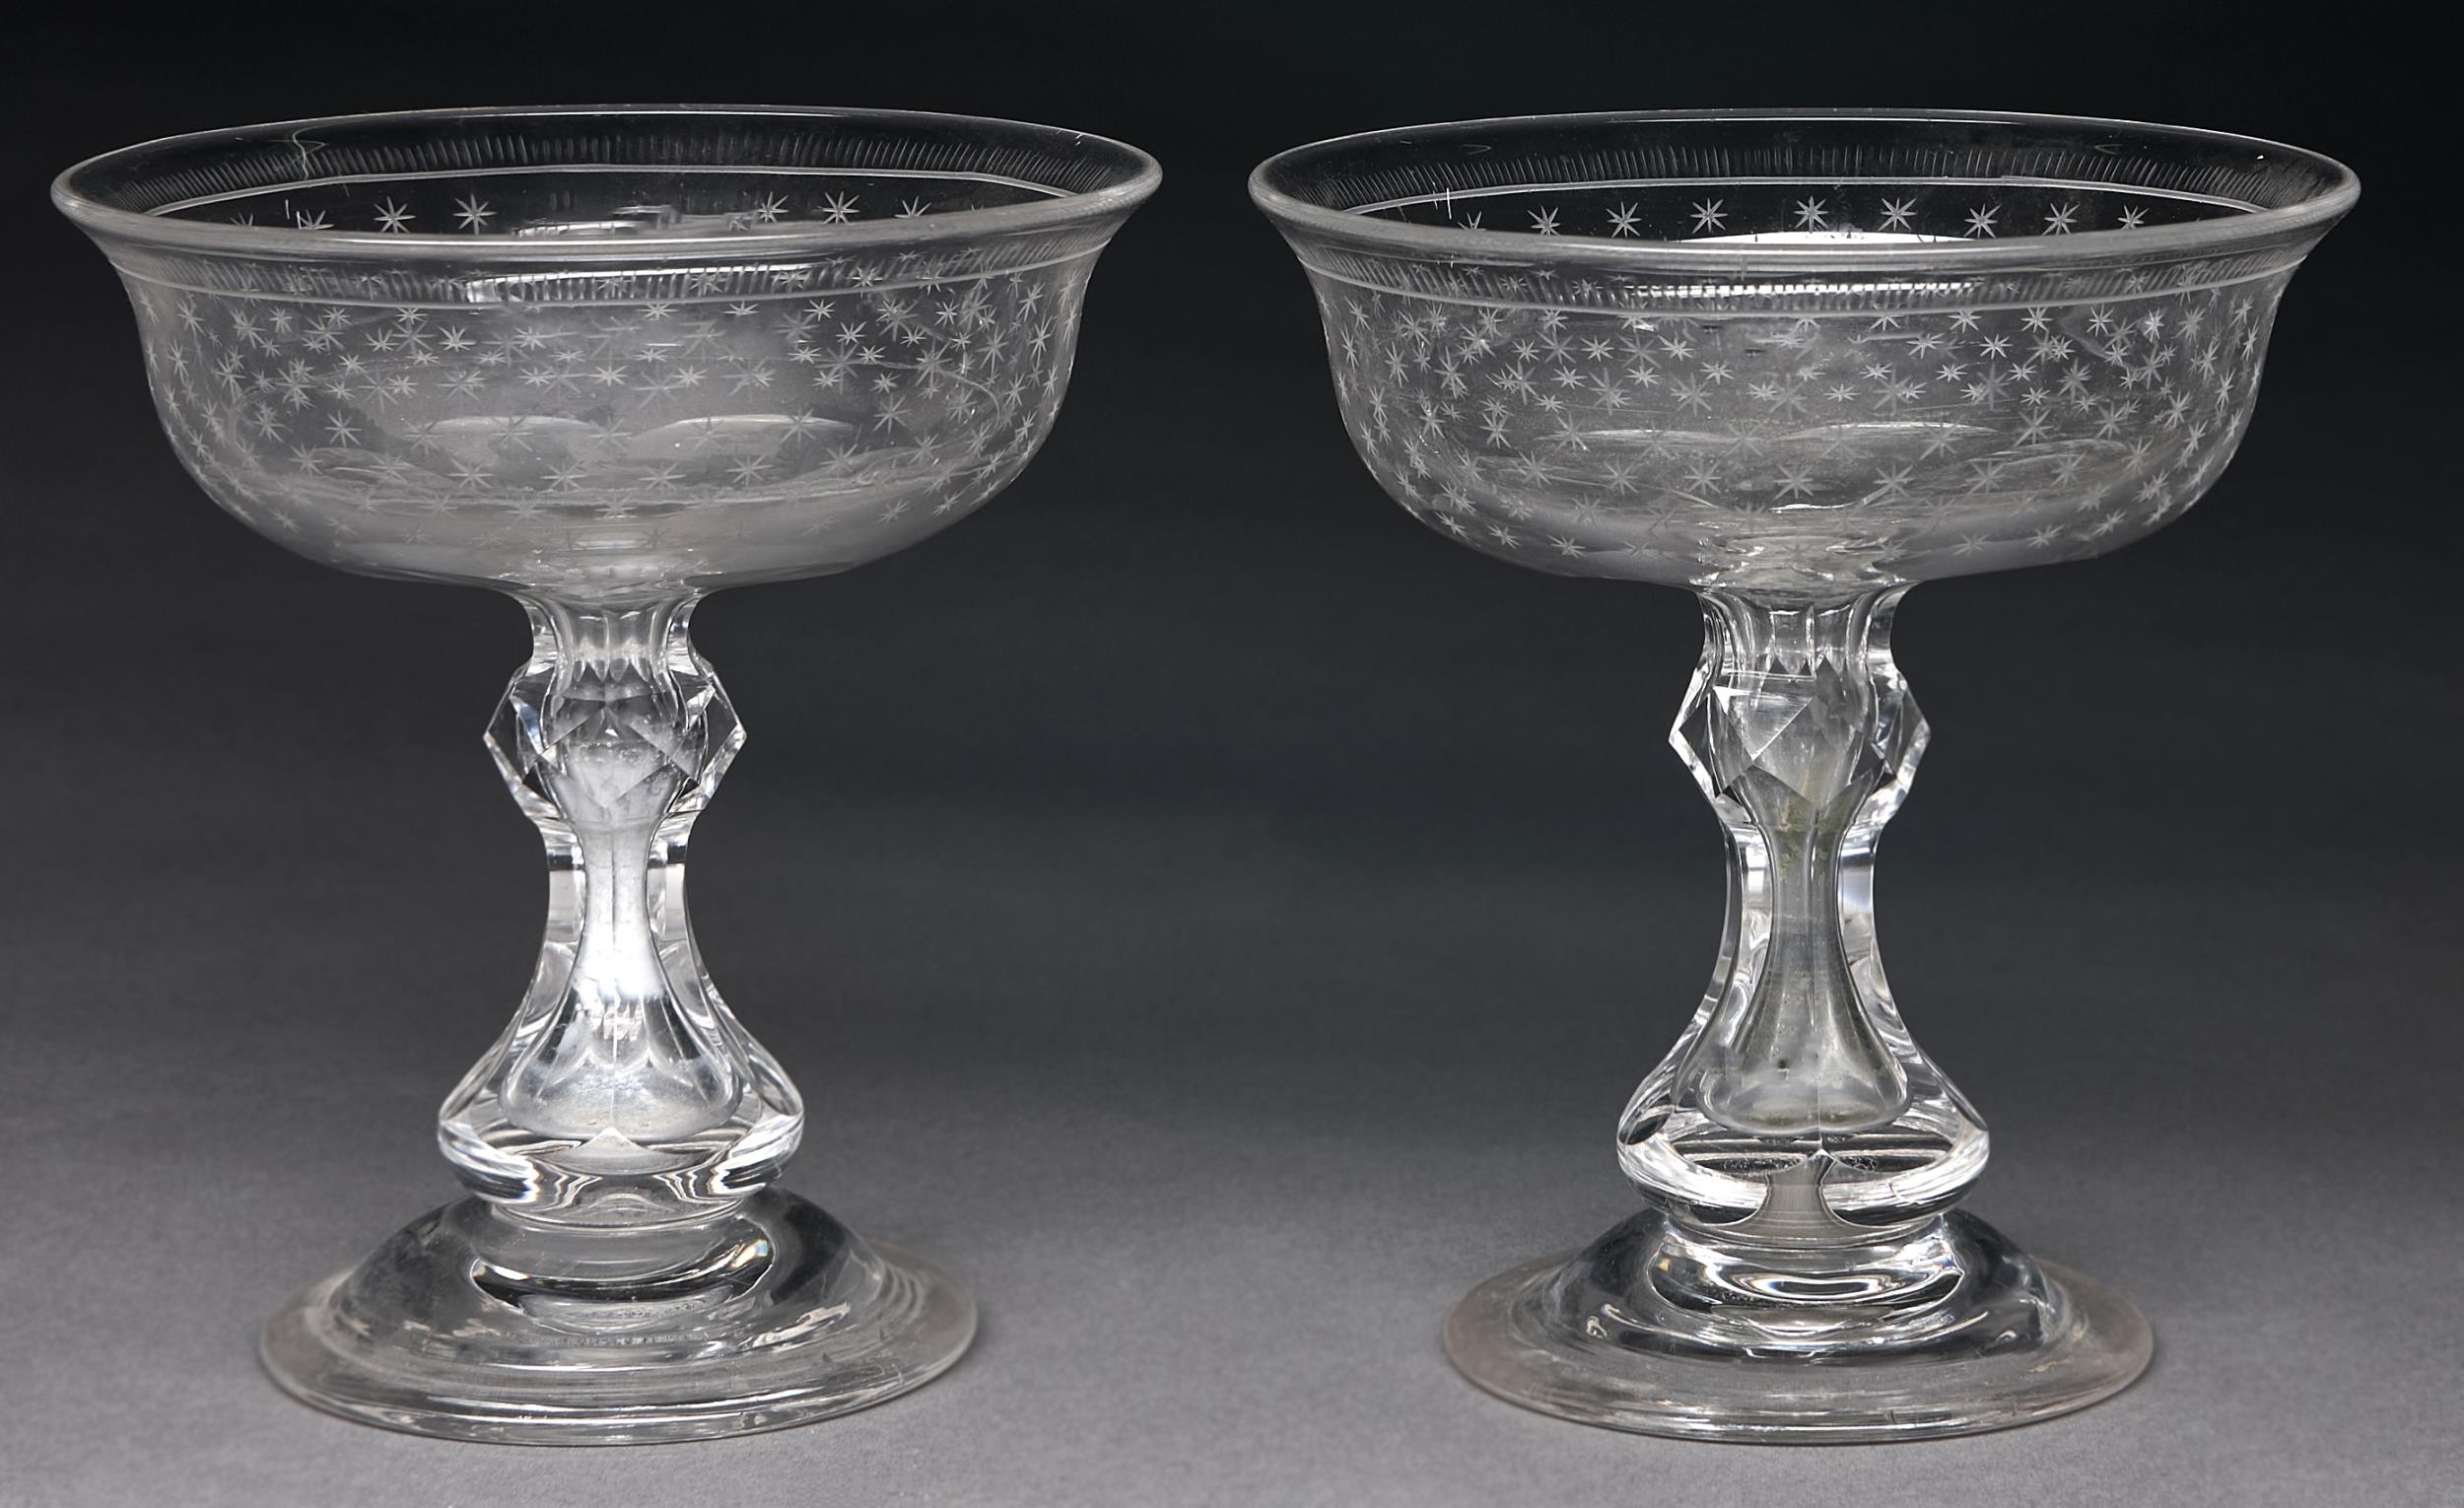 A pair of Victorian glass sweetmeat stands, c1860, the bowl engraved with stars, on faceted baluster